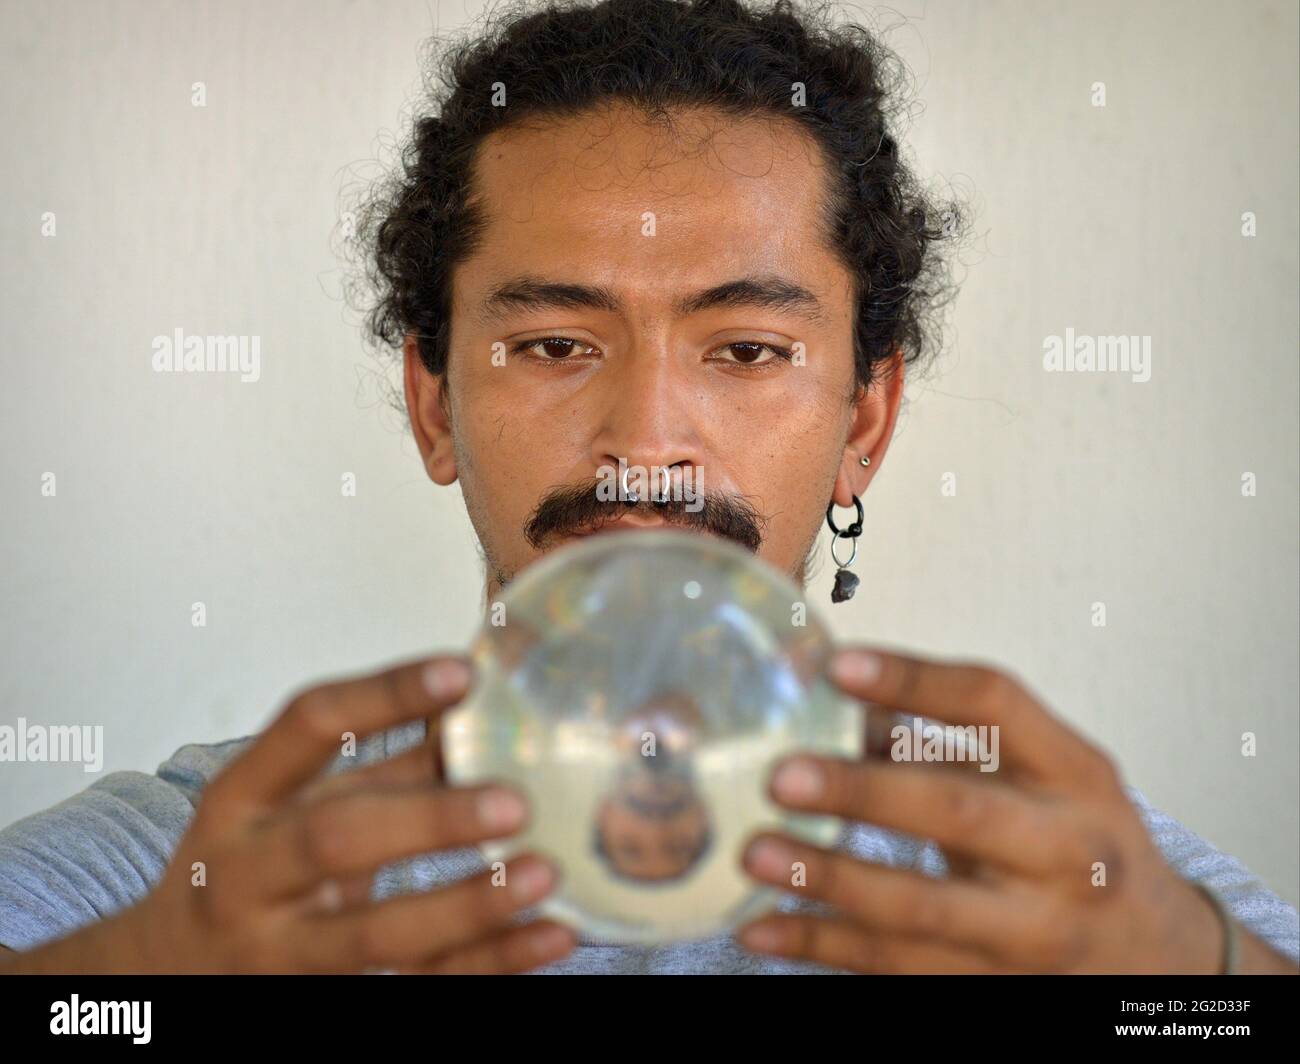 Handsome young Latino man holds a crystal ball with both hands and looks down at the crystal ball and his vertically flipped mirror image. Stock Photo